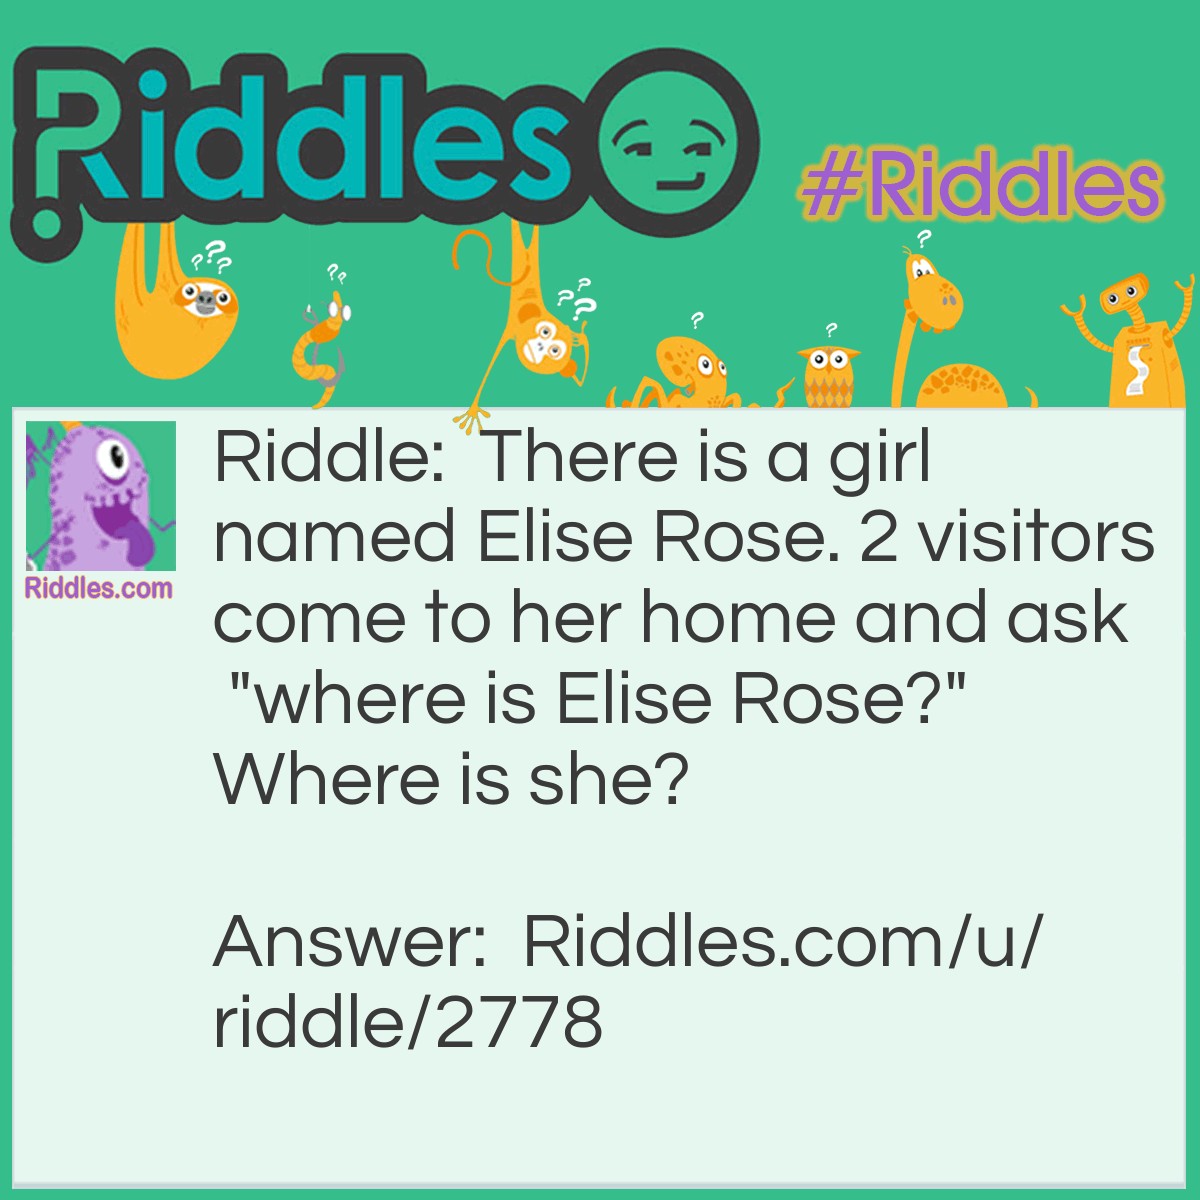 Riddle: There is a girl named Elise Rose. 2 visitors come to her home and ask "where is Elise Rose?" Where is she? Answer: In the Garden!